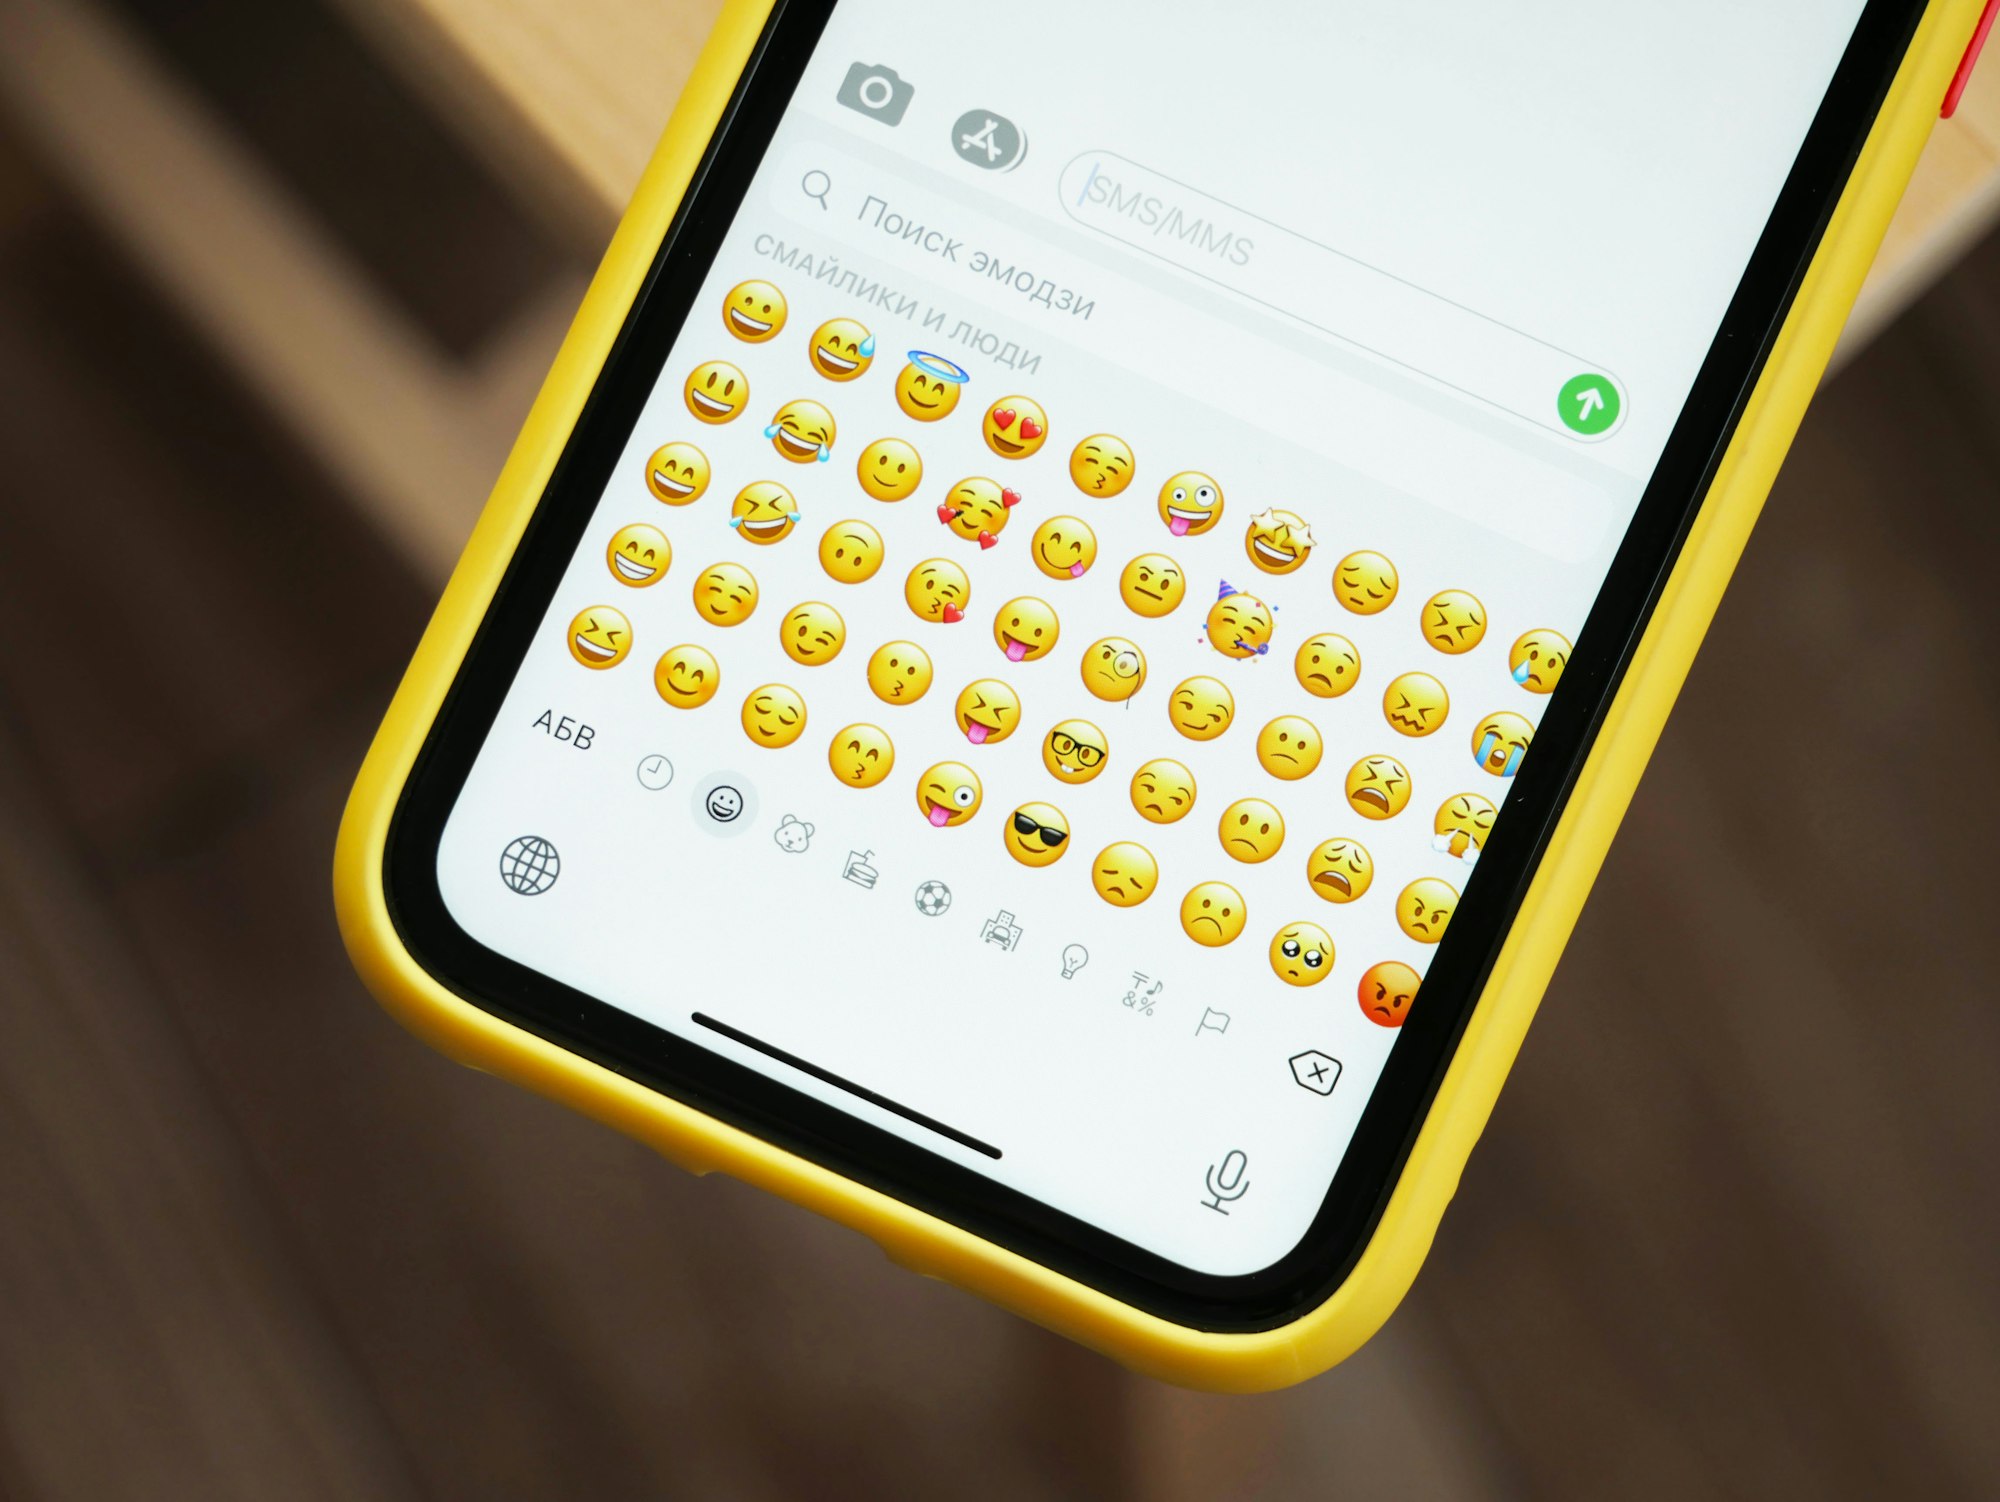 iOS 13.3: Communication Limits, Removable Memoji Stickers, & More